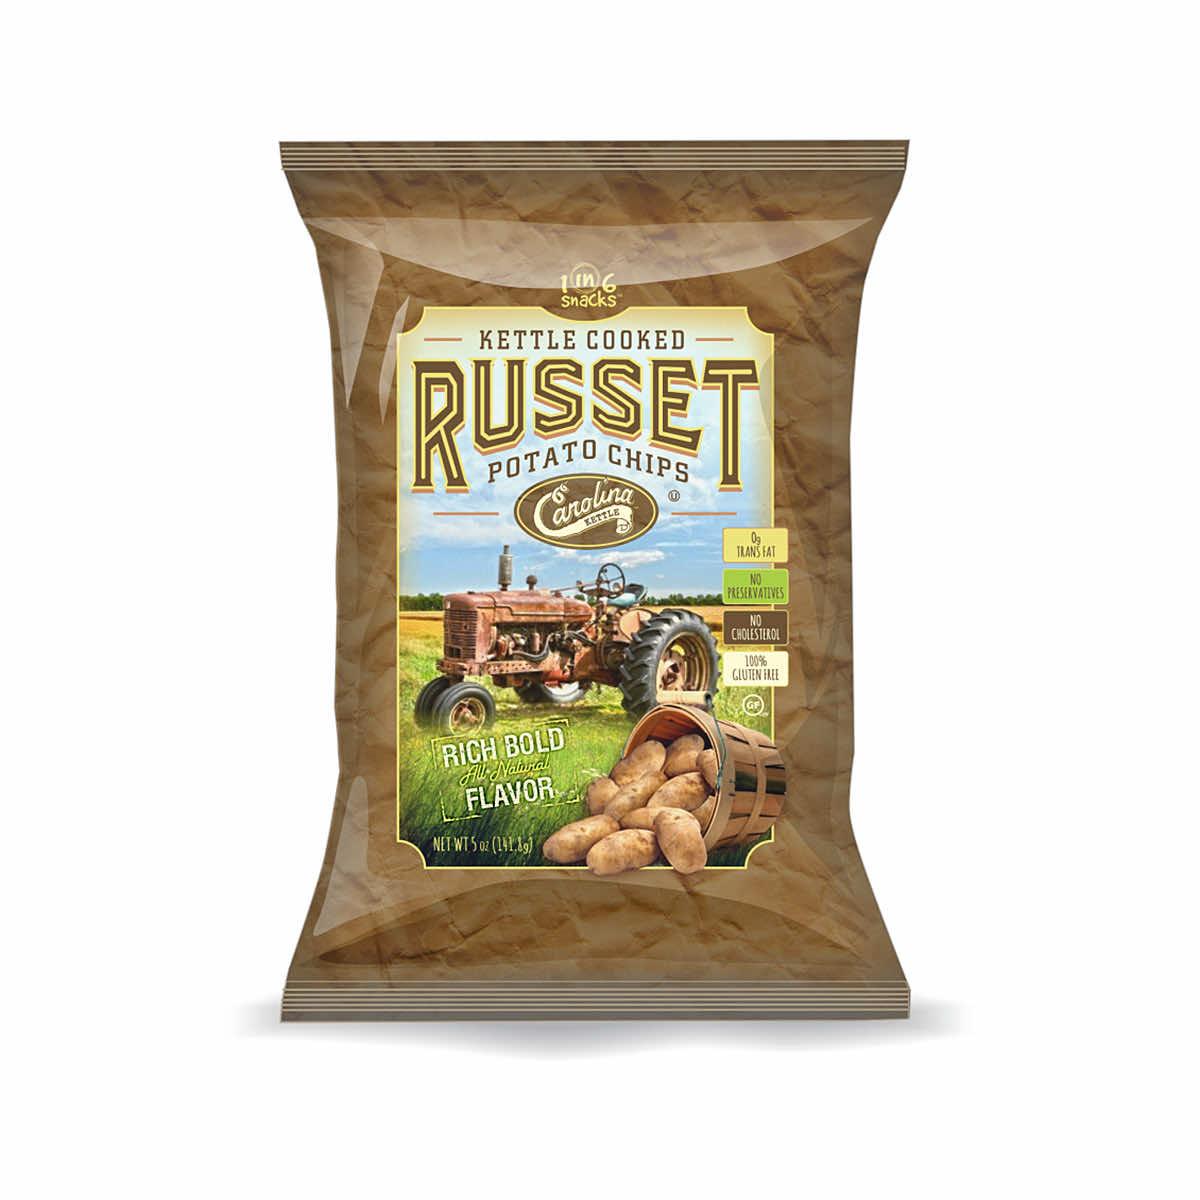  Kettle Cooked Russet Potato Chips - 2 Ounce